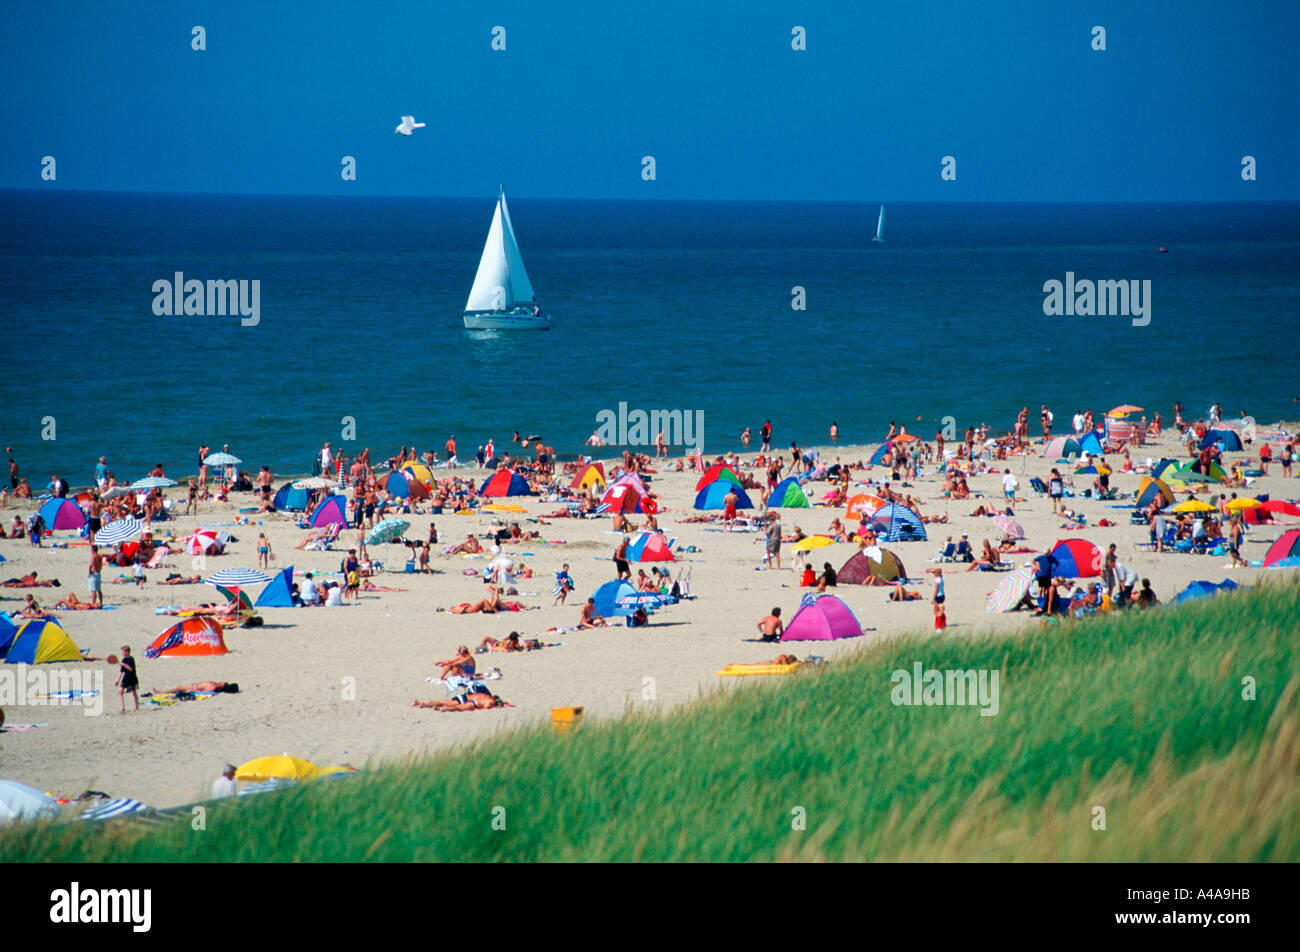 Vacationists at beach / Egmont Stock Photo